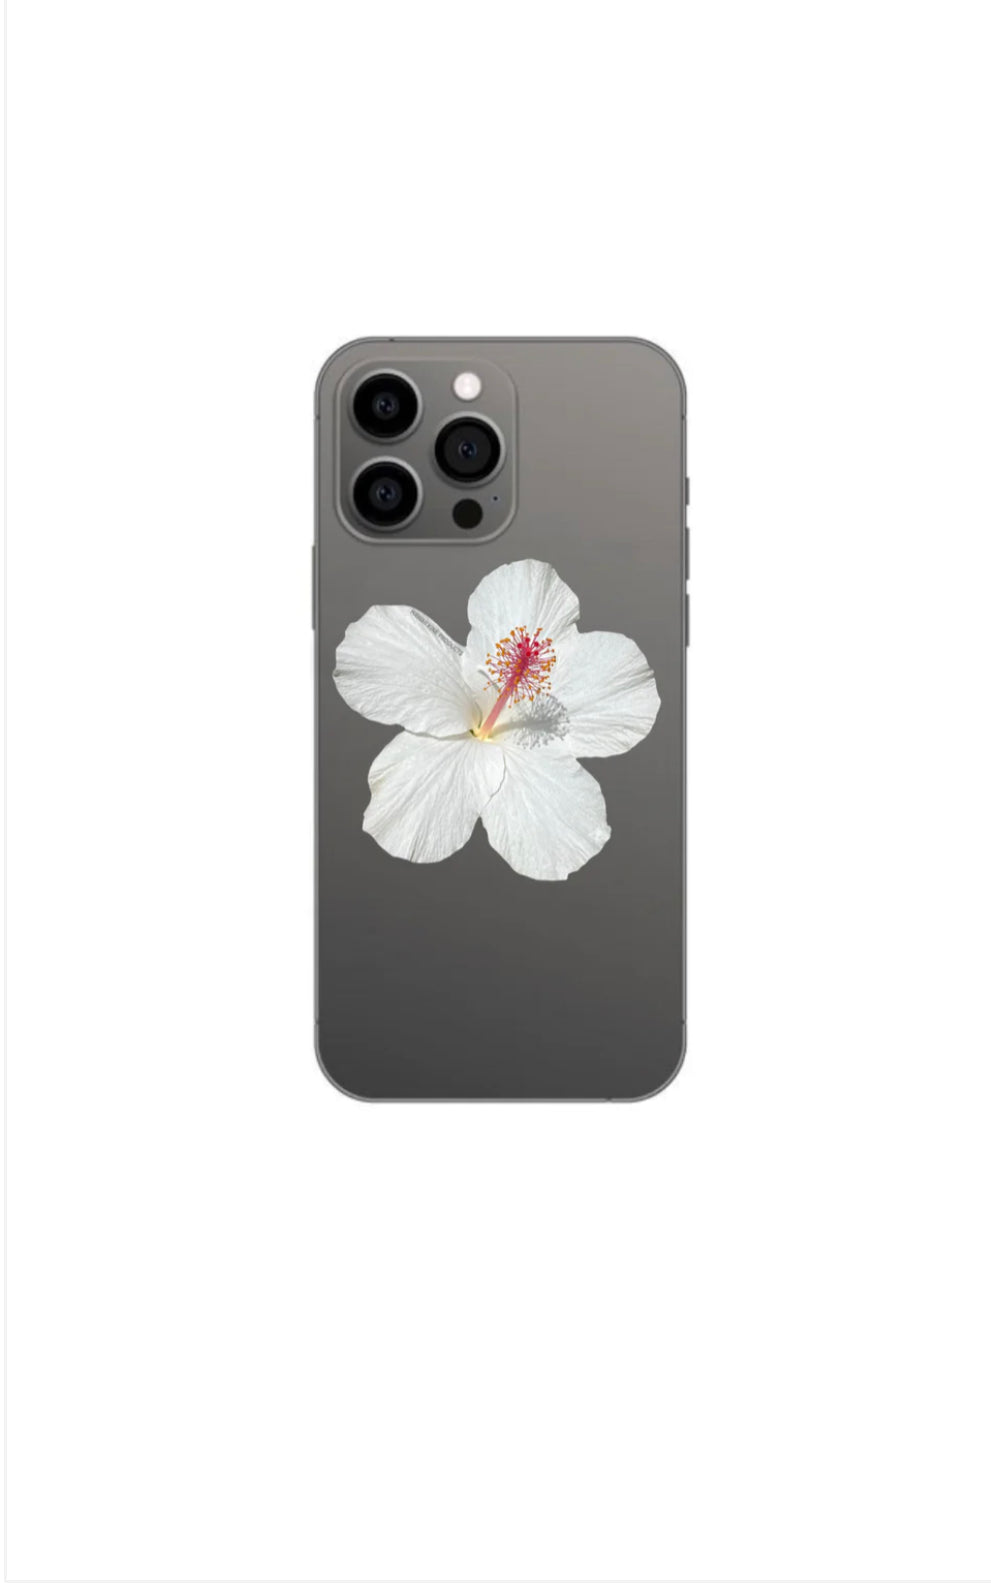 HIBISCUS PHONE GRIP OR BADGE HOLDER (COMES IN MORE COLORS)